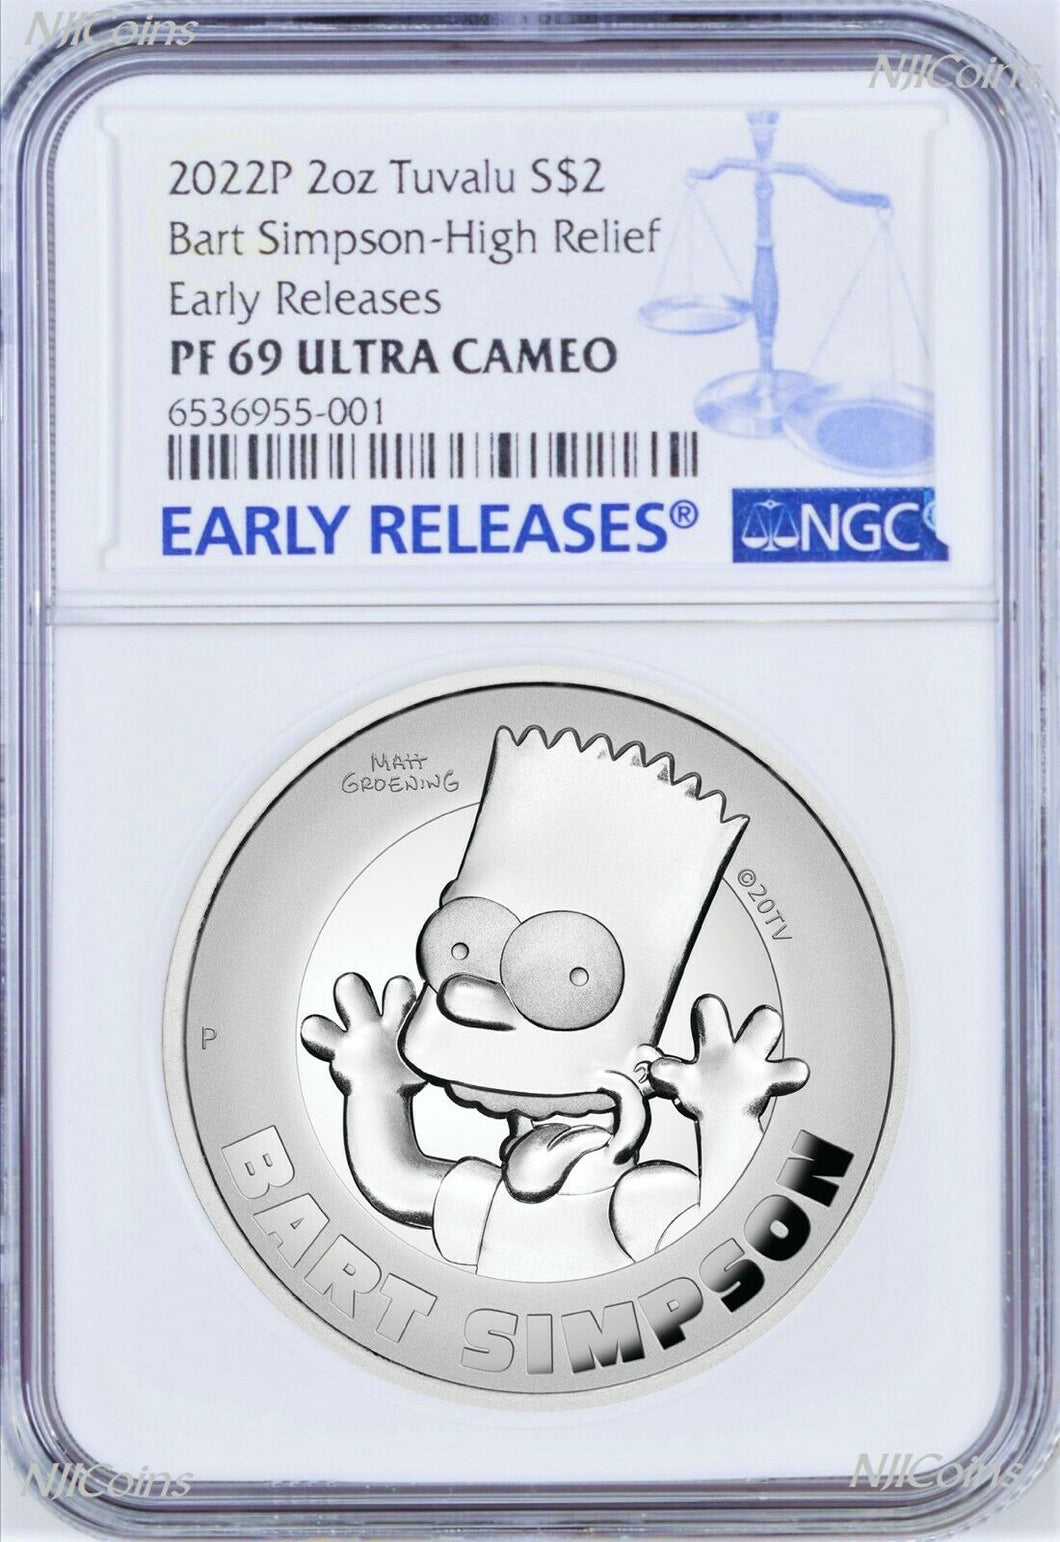 2022 HIGH RELIEF Simpsons Bart Simpson Proof $2 2oz Silver COIN NGC PF69 ER